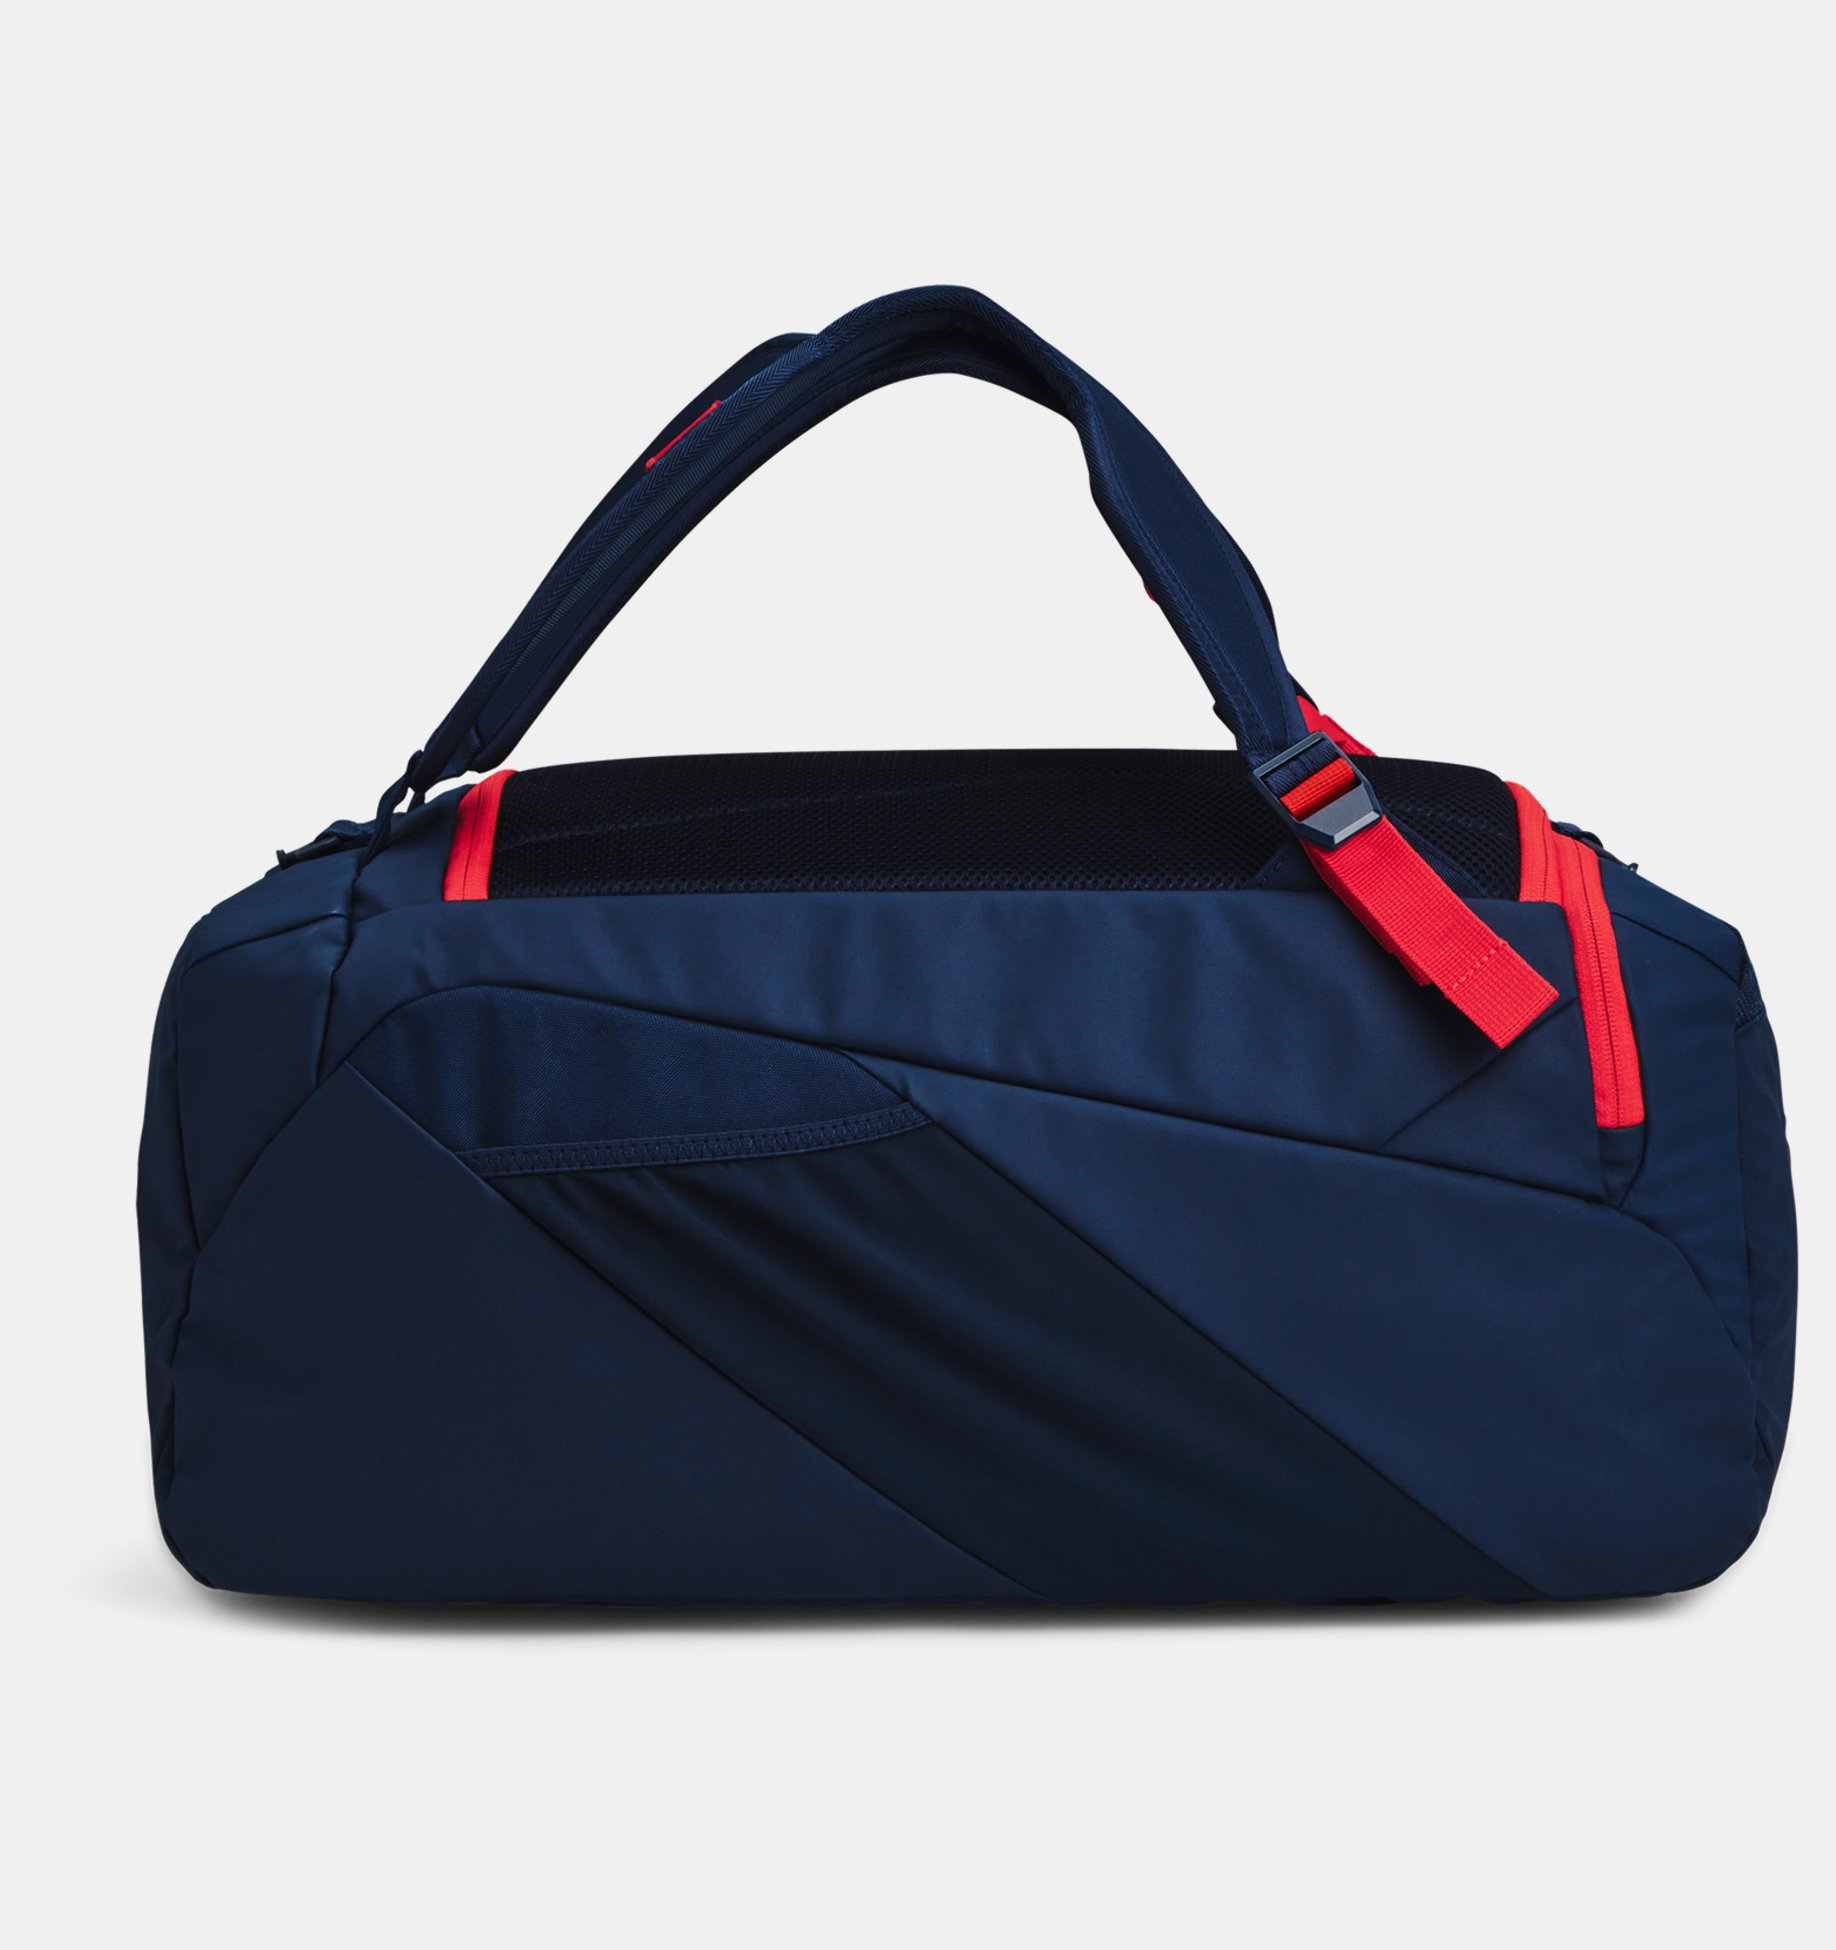 Pitch Marca Under ArmourUnder Armour Contain Duo Duffle Bag Borsone Unisex-Adulto 